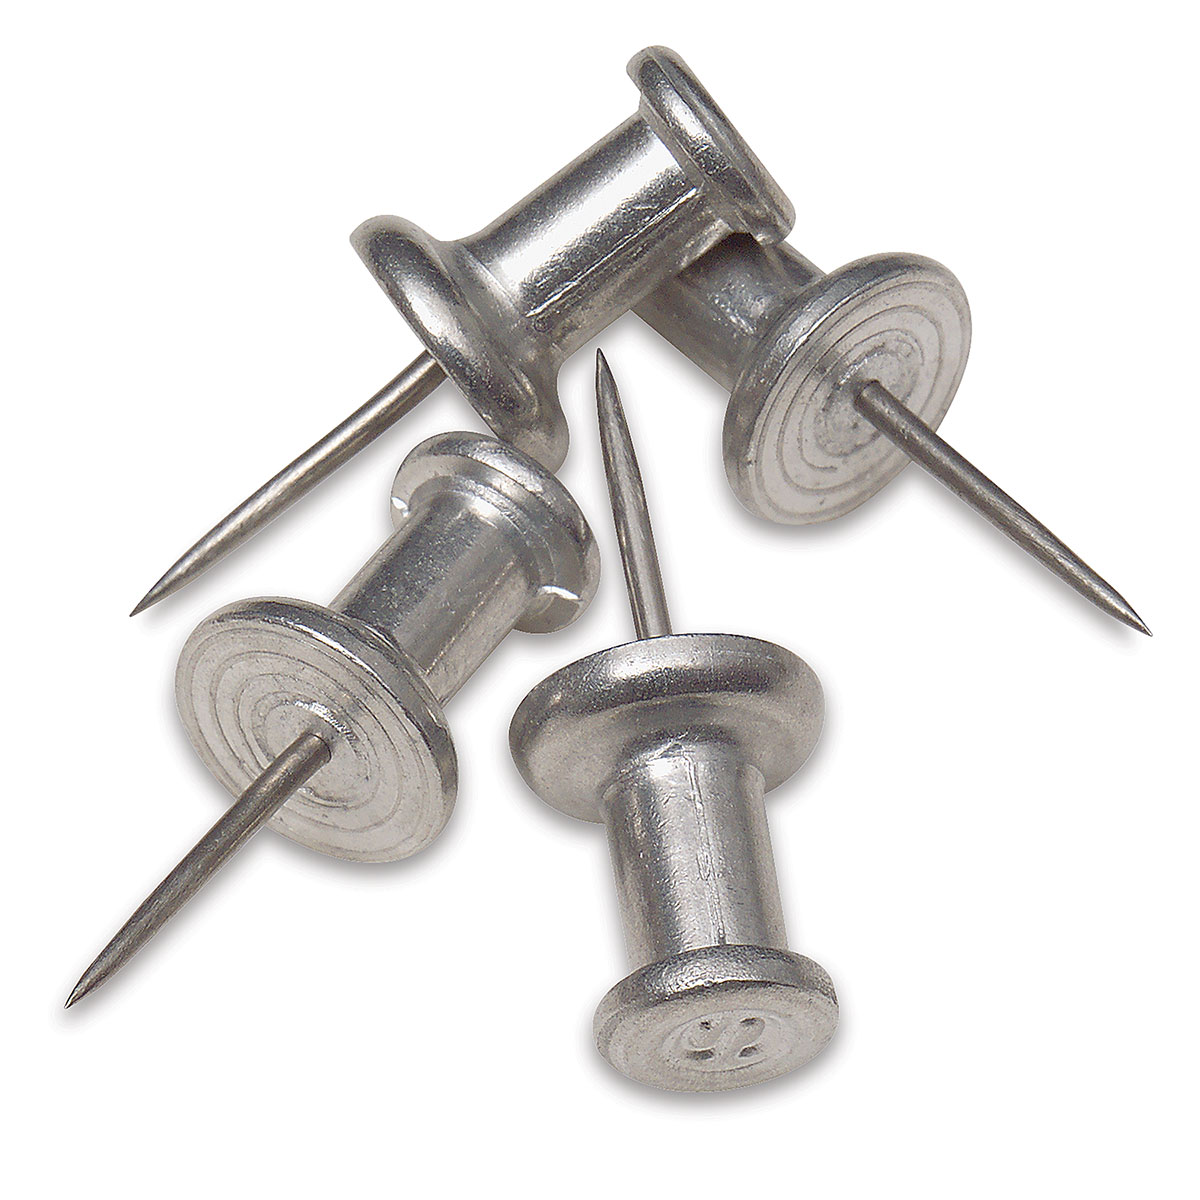 Flexitable : Aluminium And Stainless Steel 1/2in Push Pin : Box Of 100